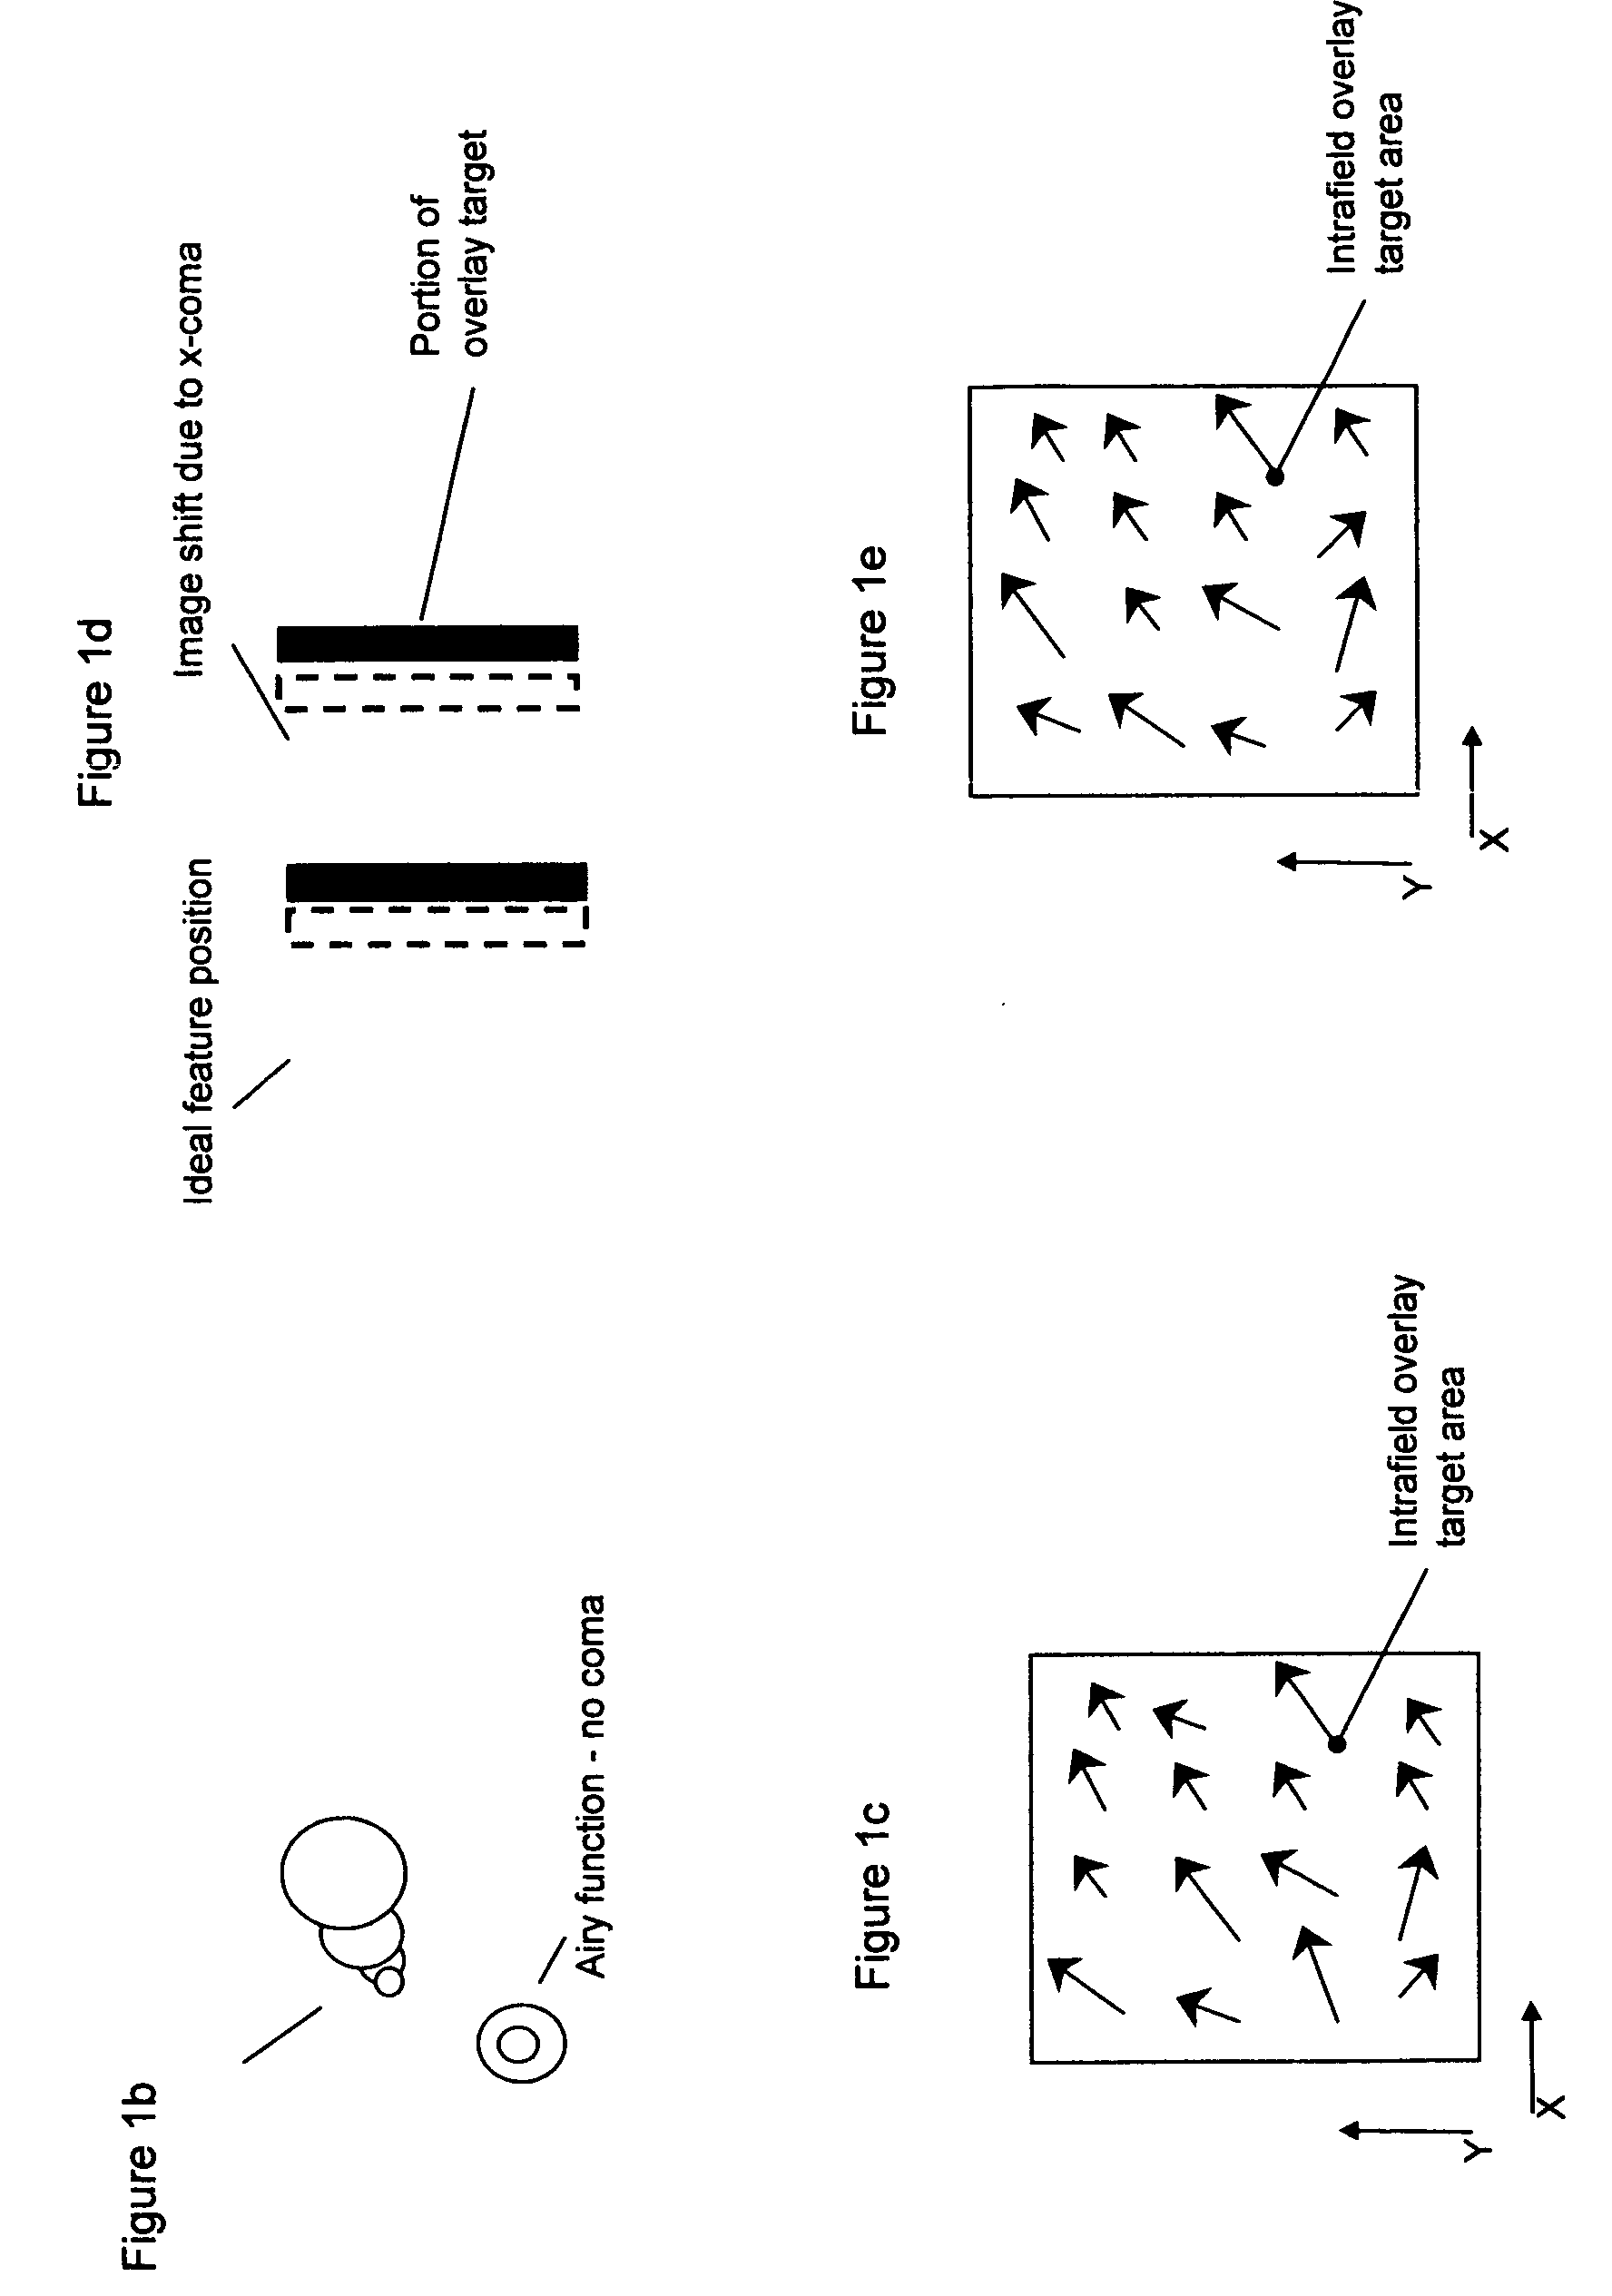 Process for determination of optimized exposure conditions for transverse distortion mapping